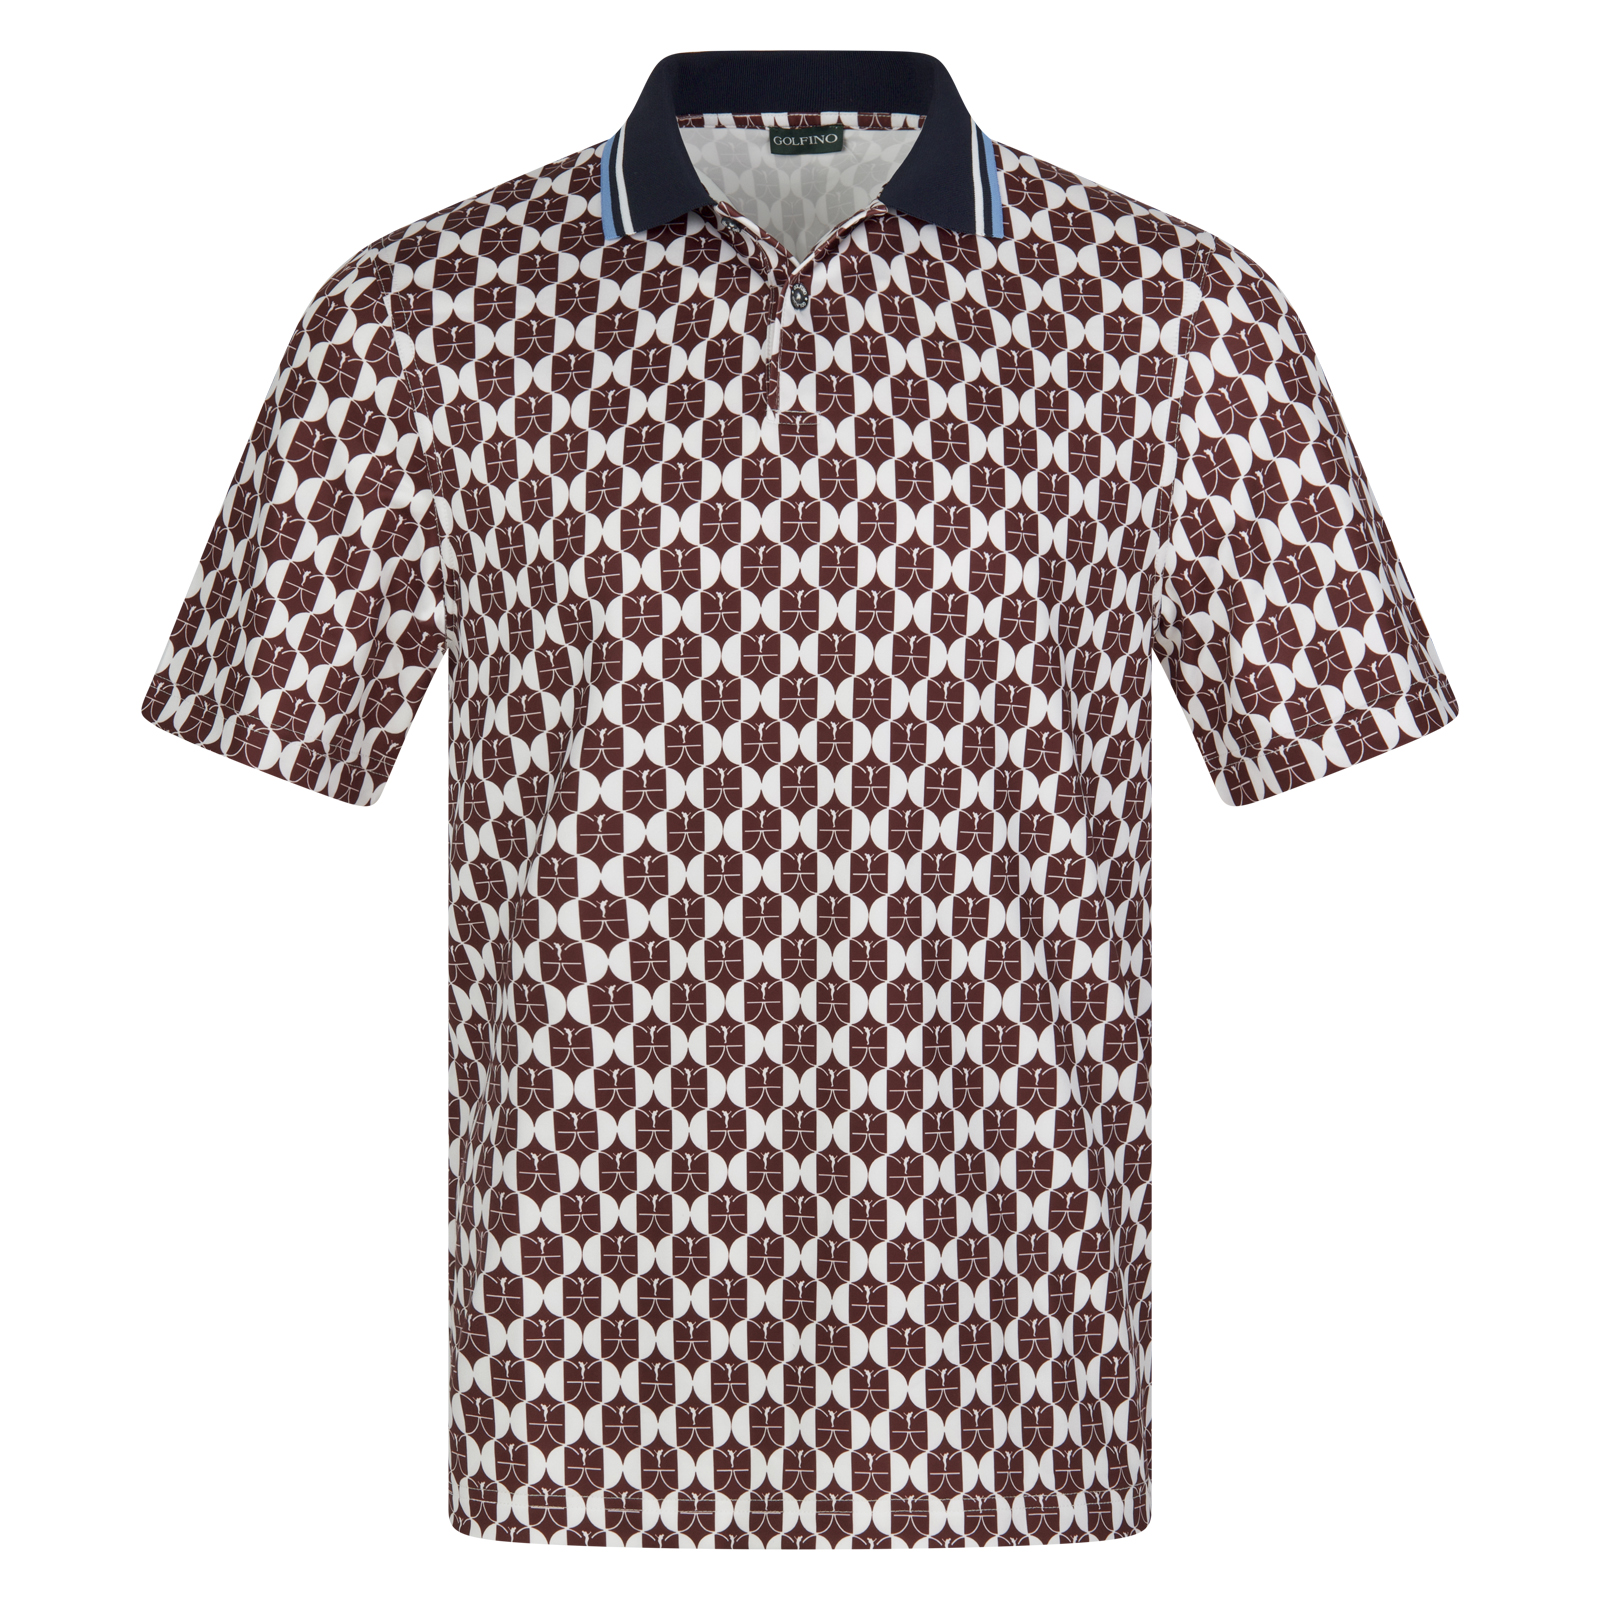 Men's stretch golf polo shirt with all-over monogram print